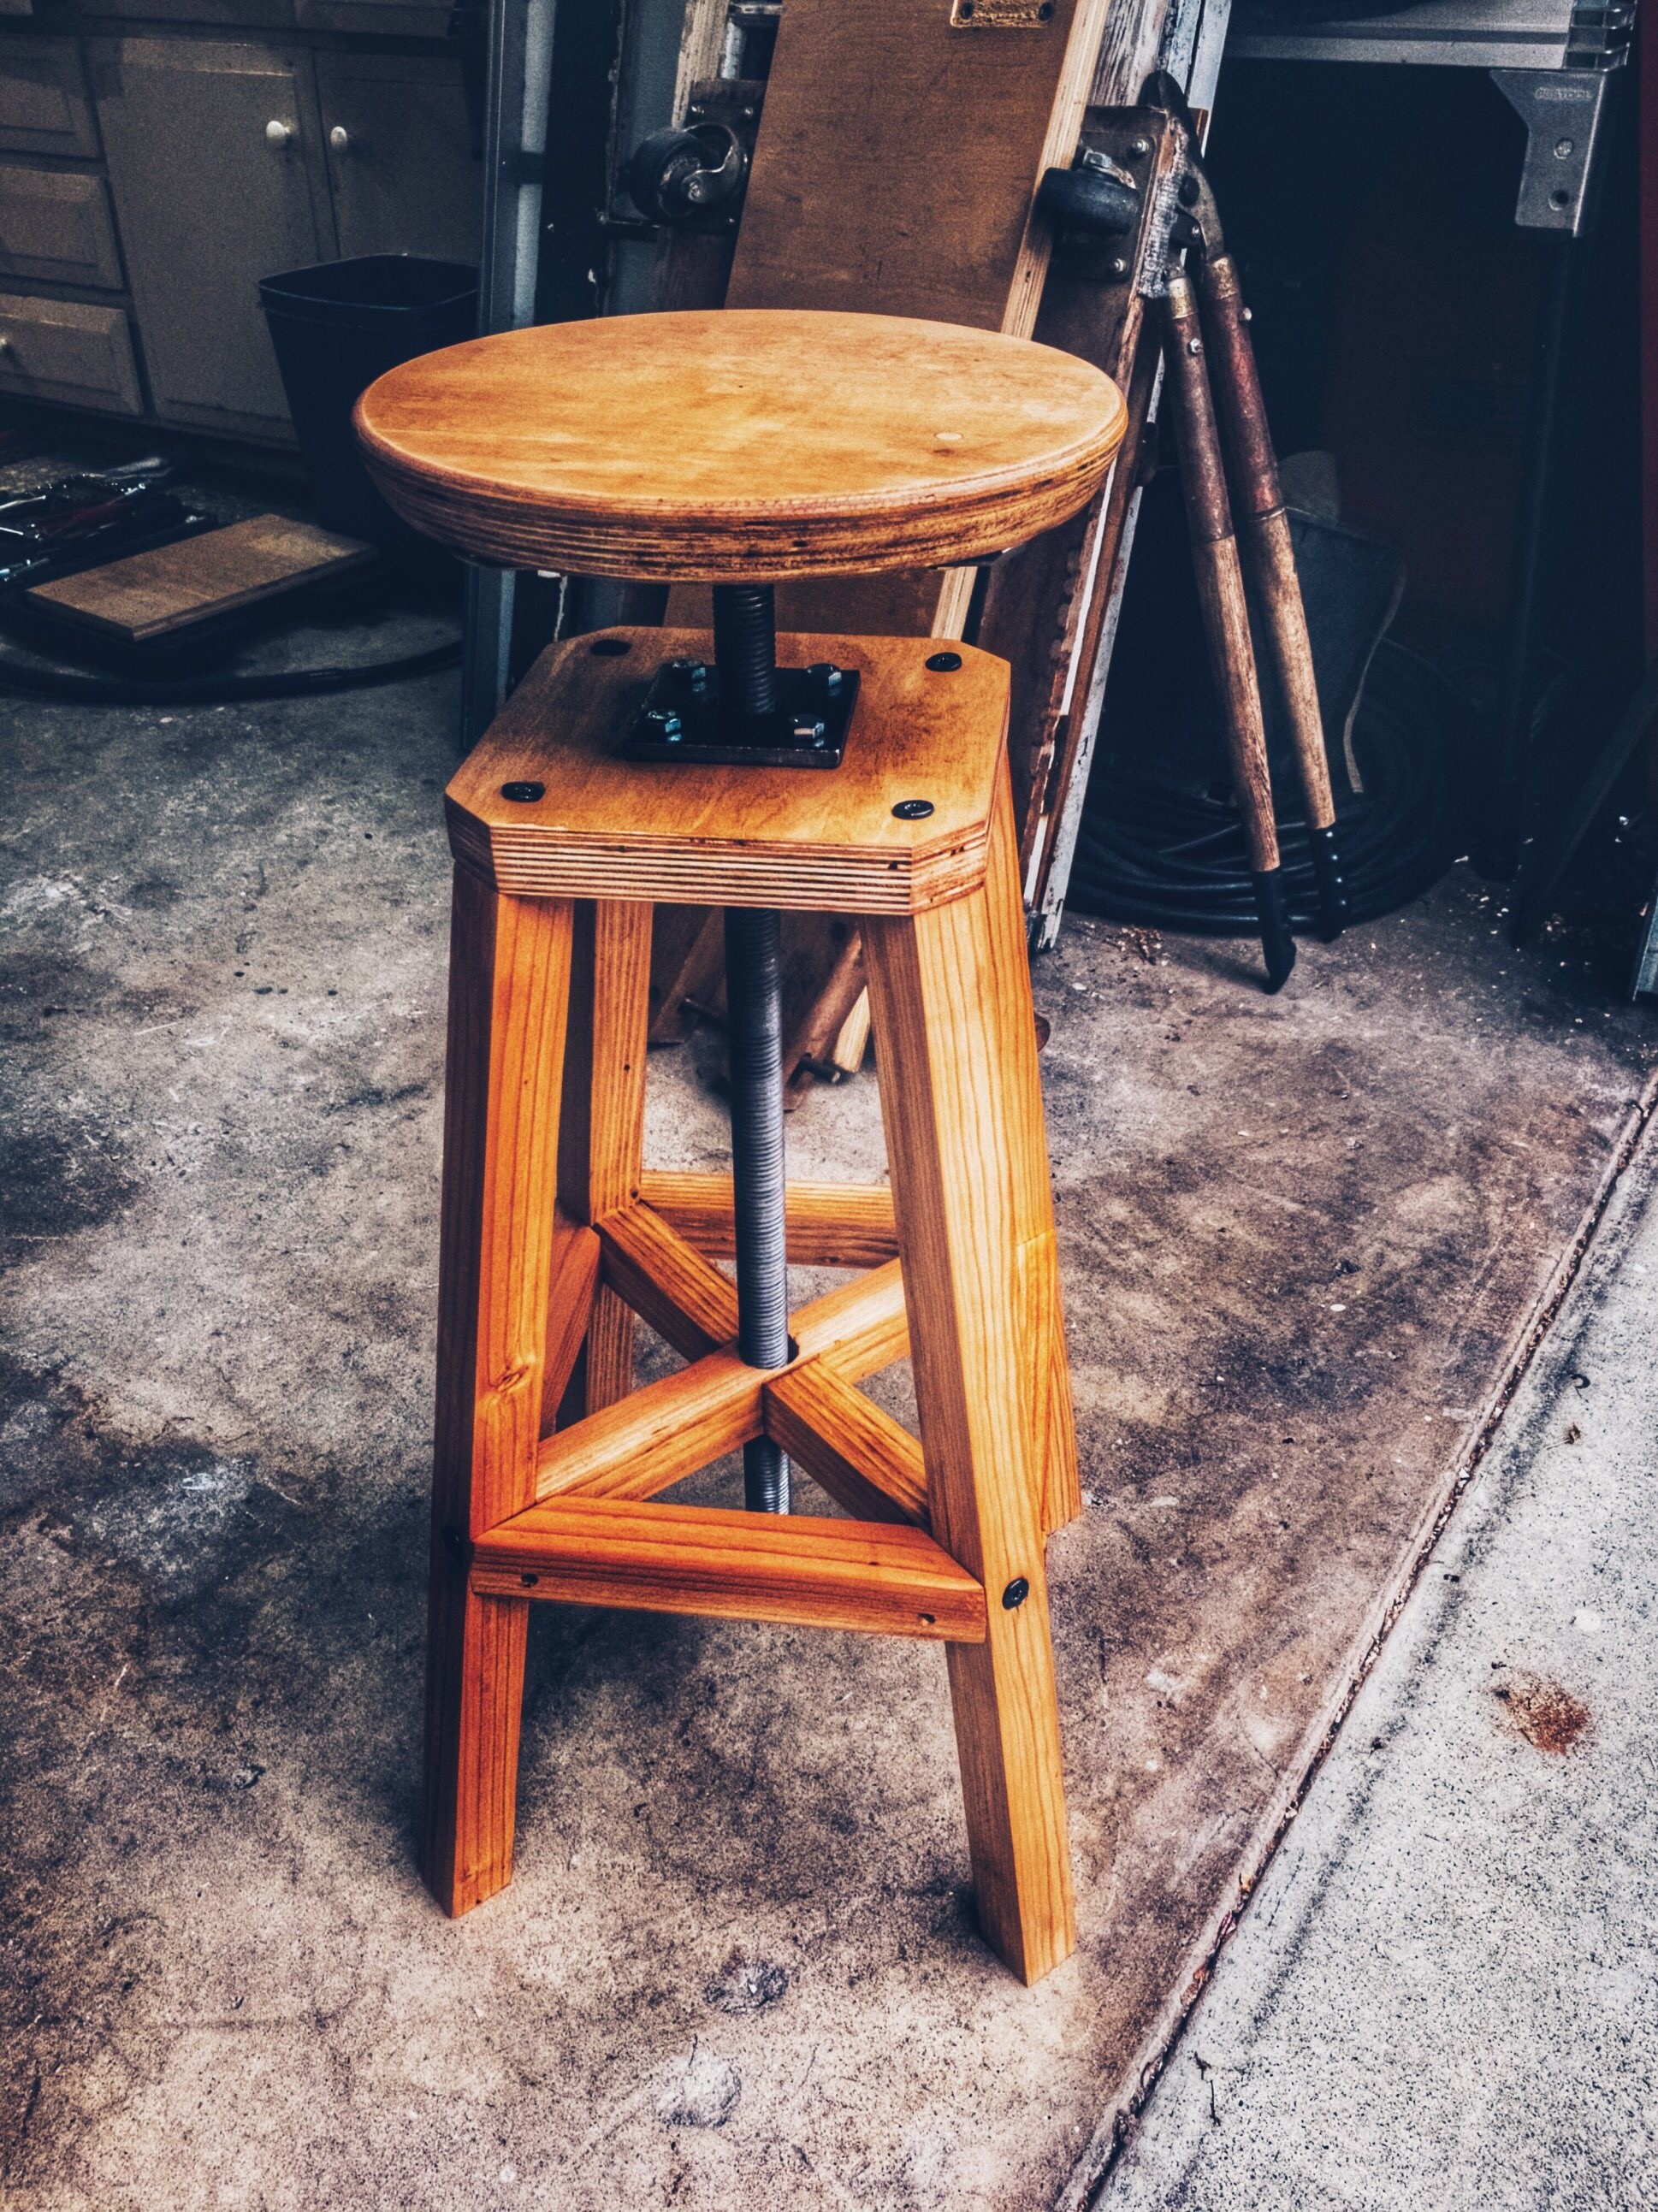 Ana white suped up shop stool diy projects